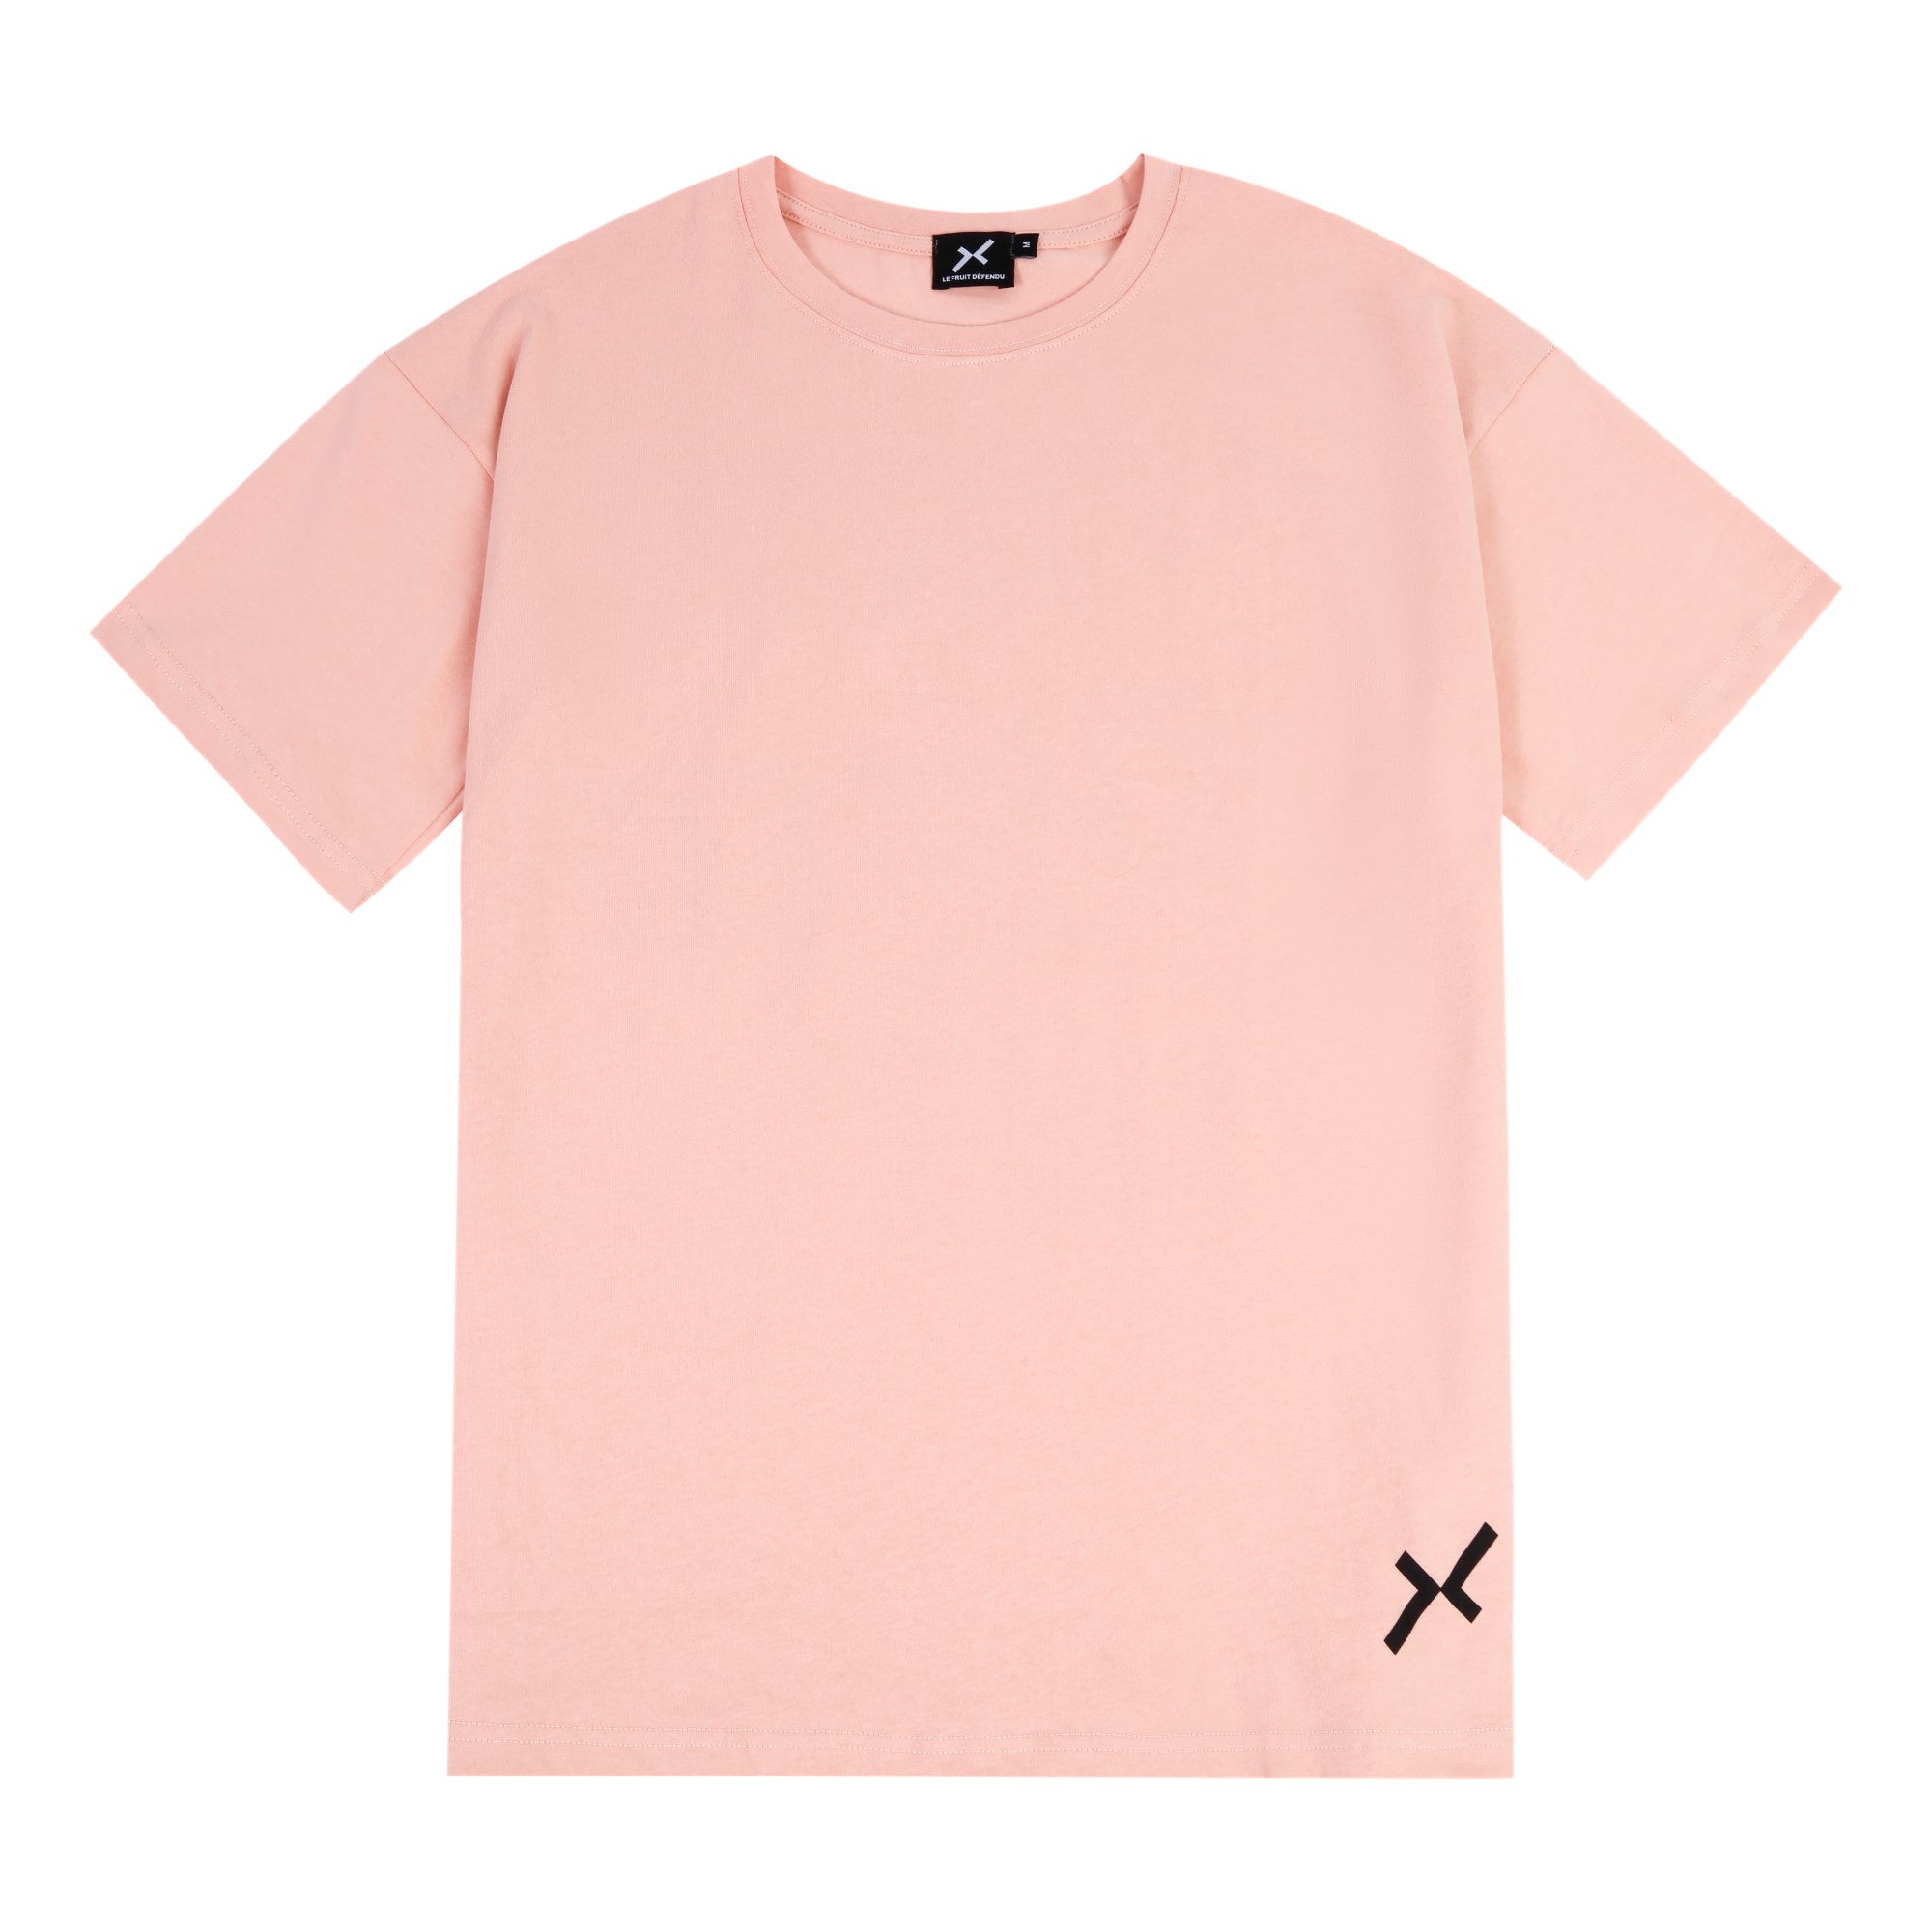 Tempting Fate Tee - Pink